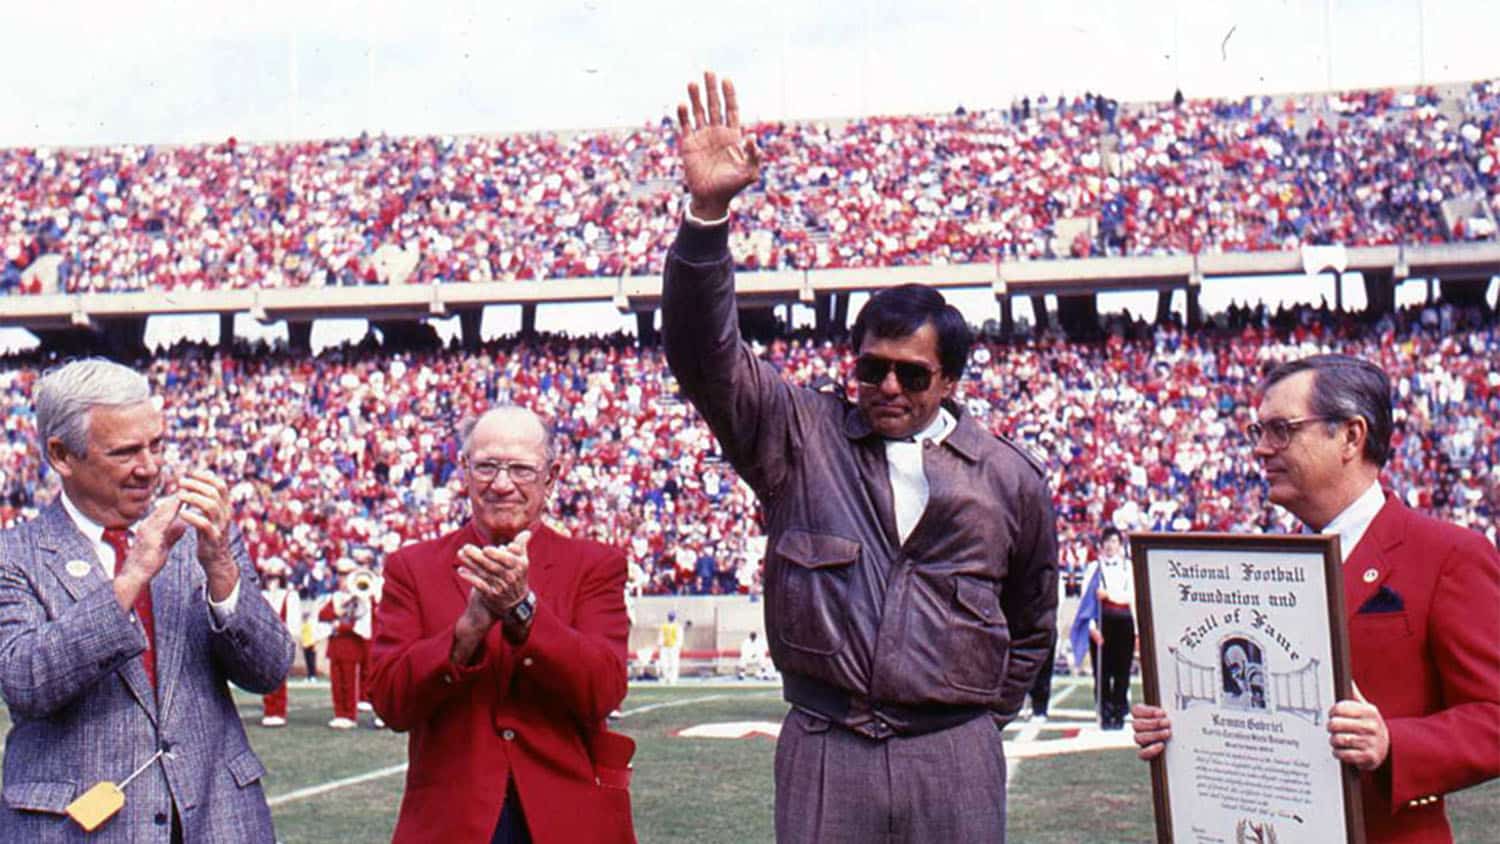 Roman Gabriel waves to the crowd during his induction into the College Football Hall of Fame